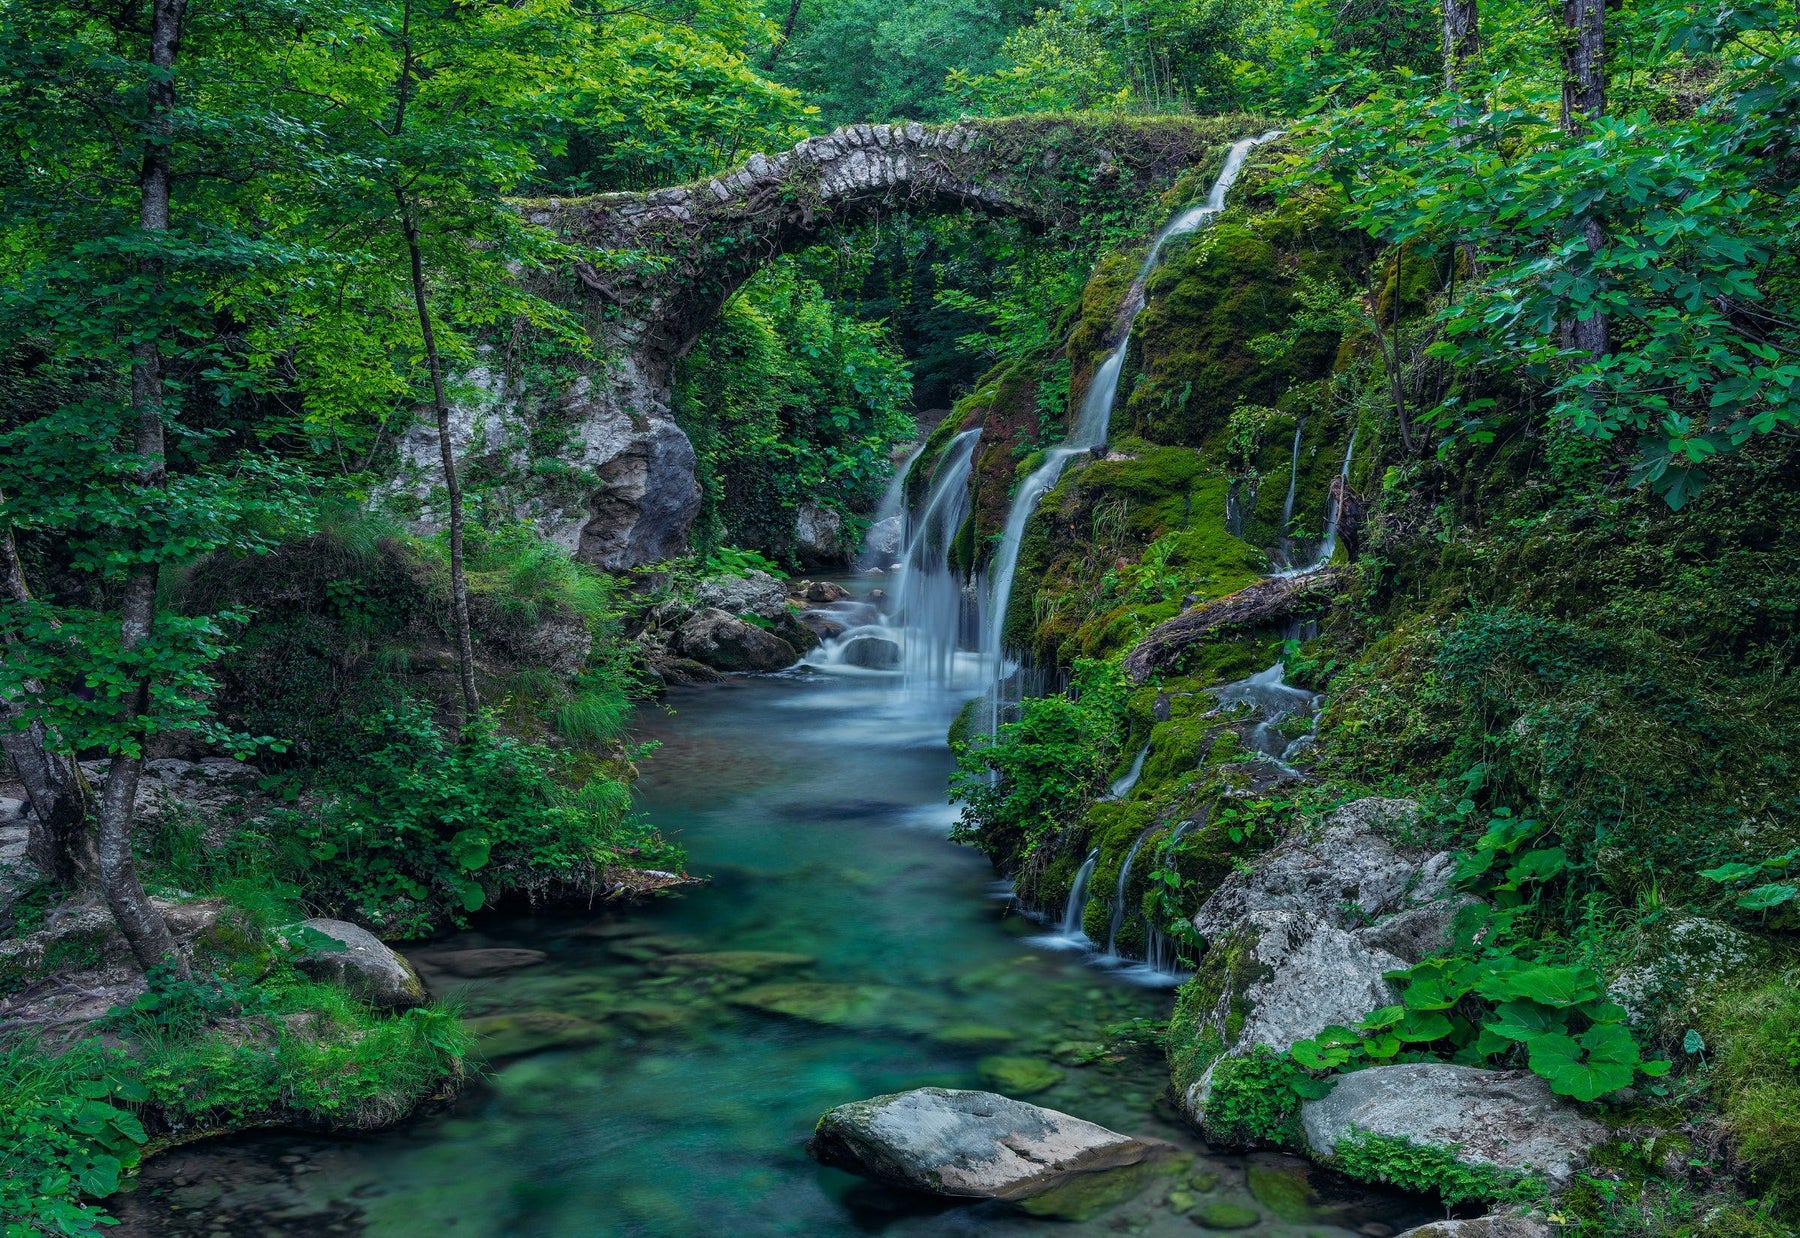 Old stone bridge over a moss waterfall and stream in a green forest in Italy